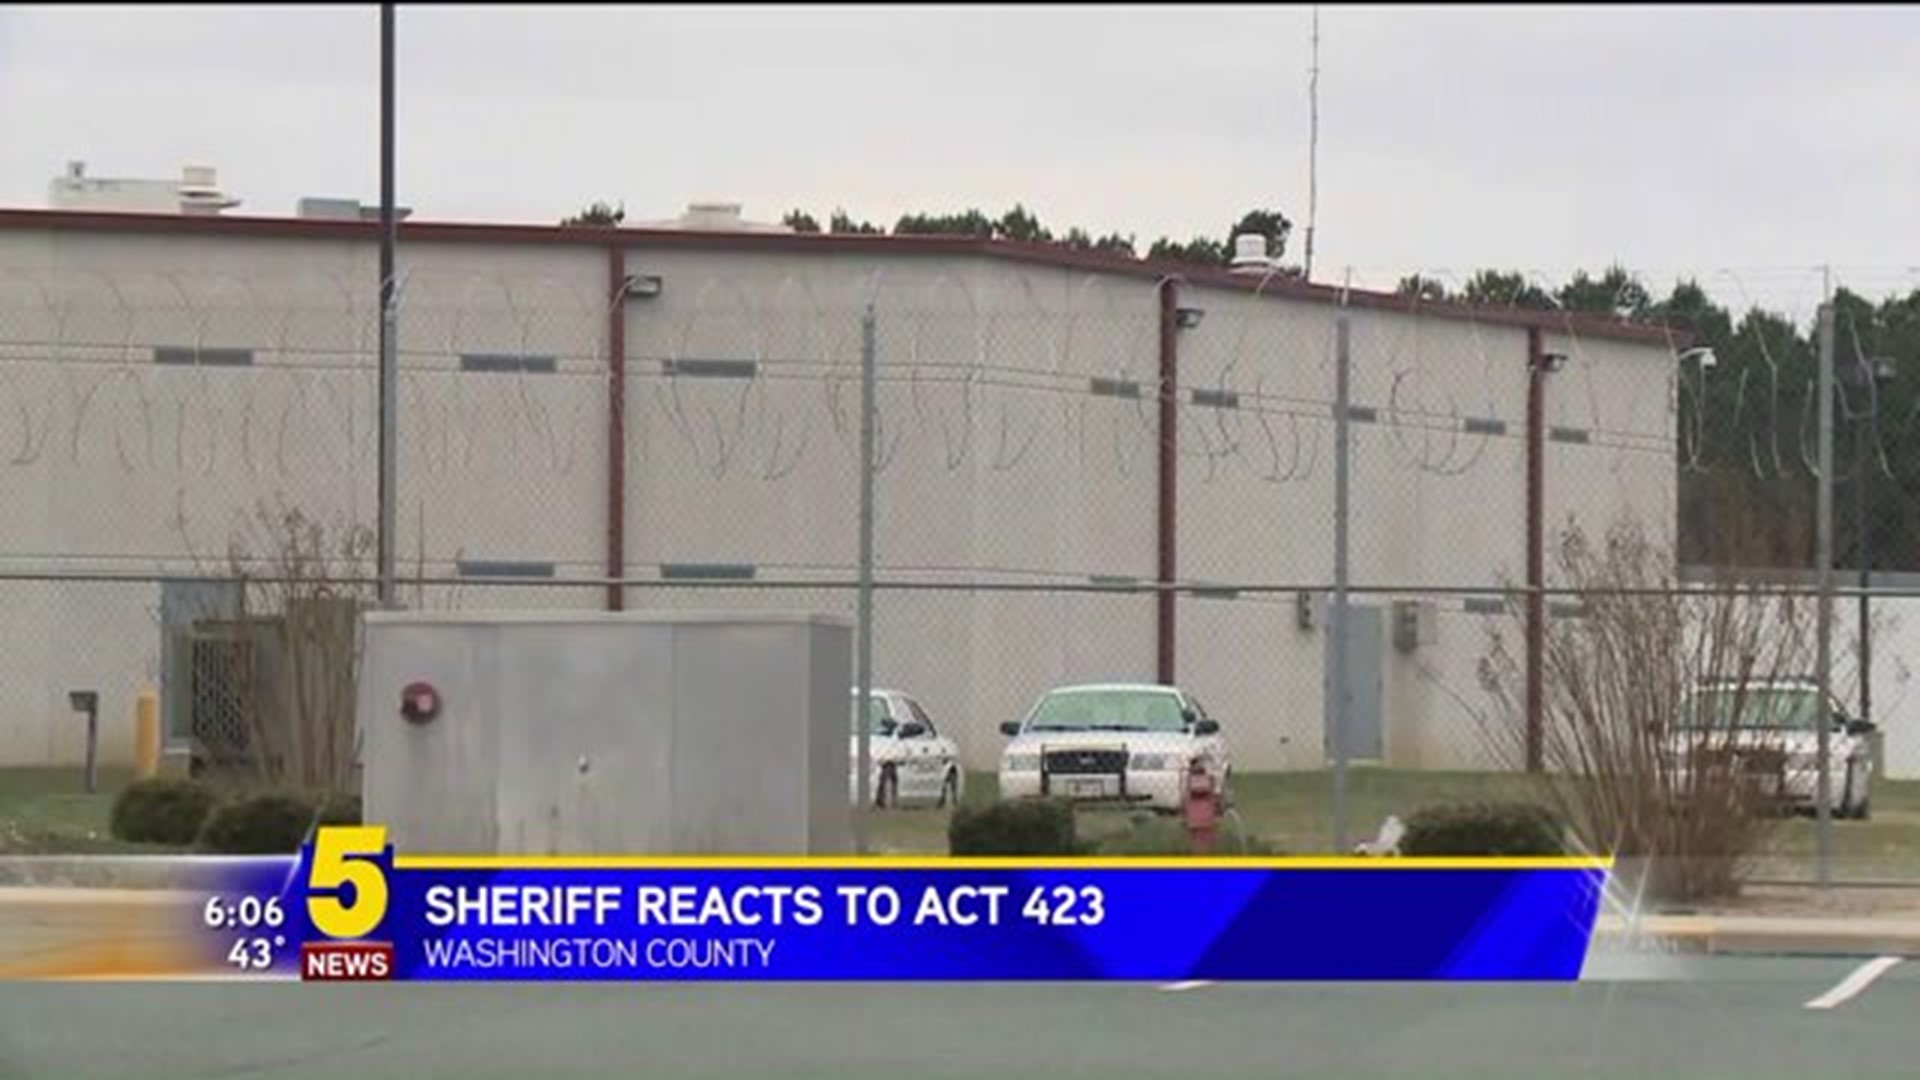 Sheriff Reacts To Act 423